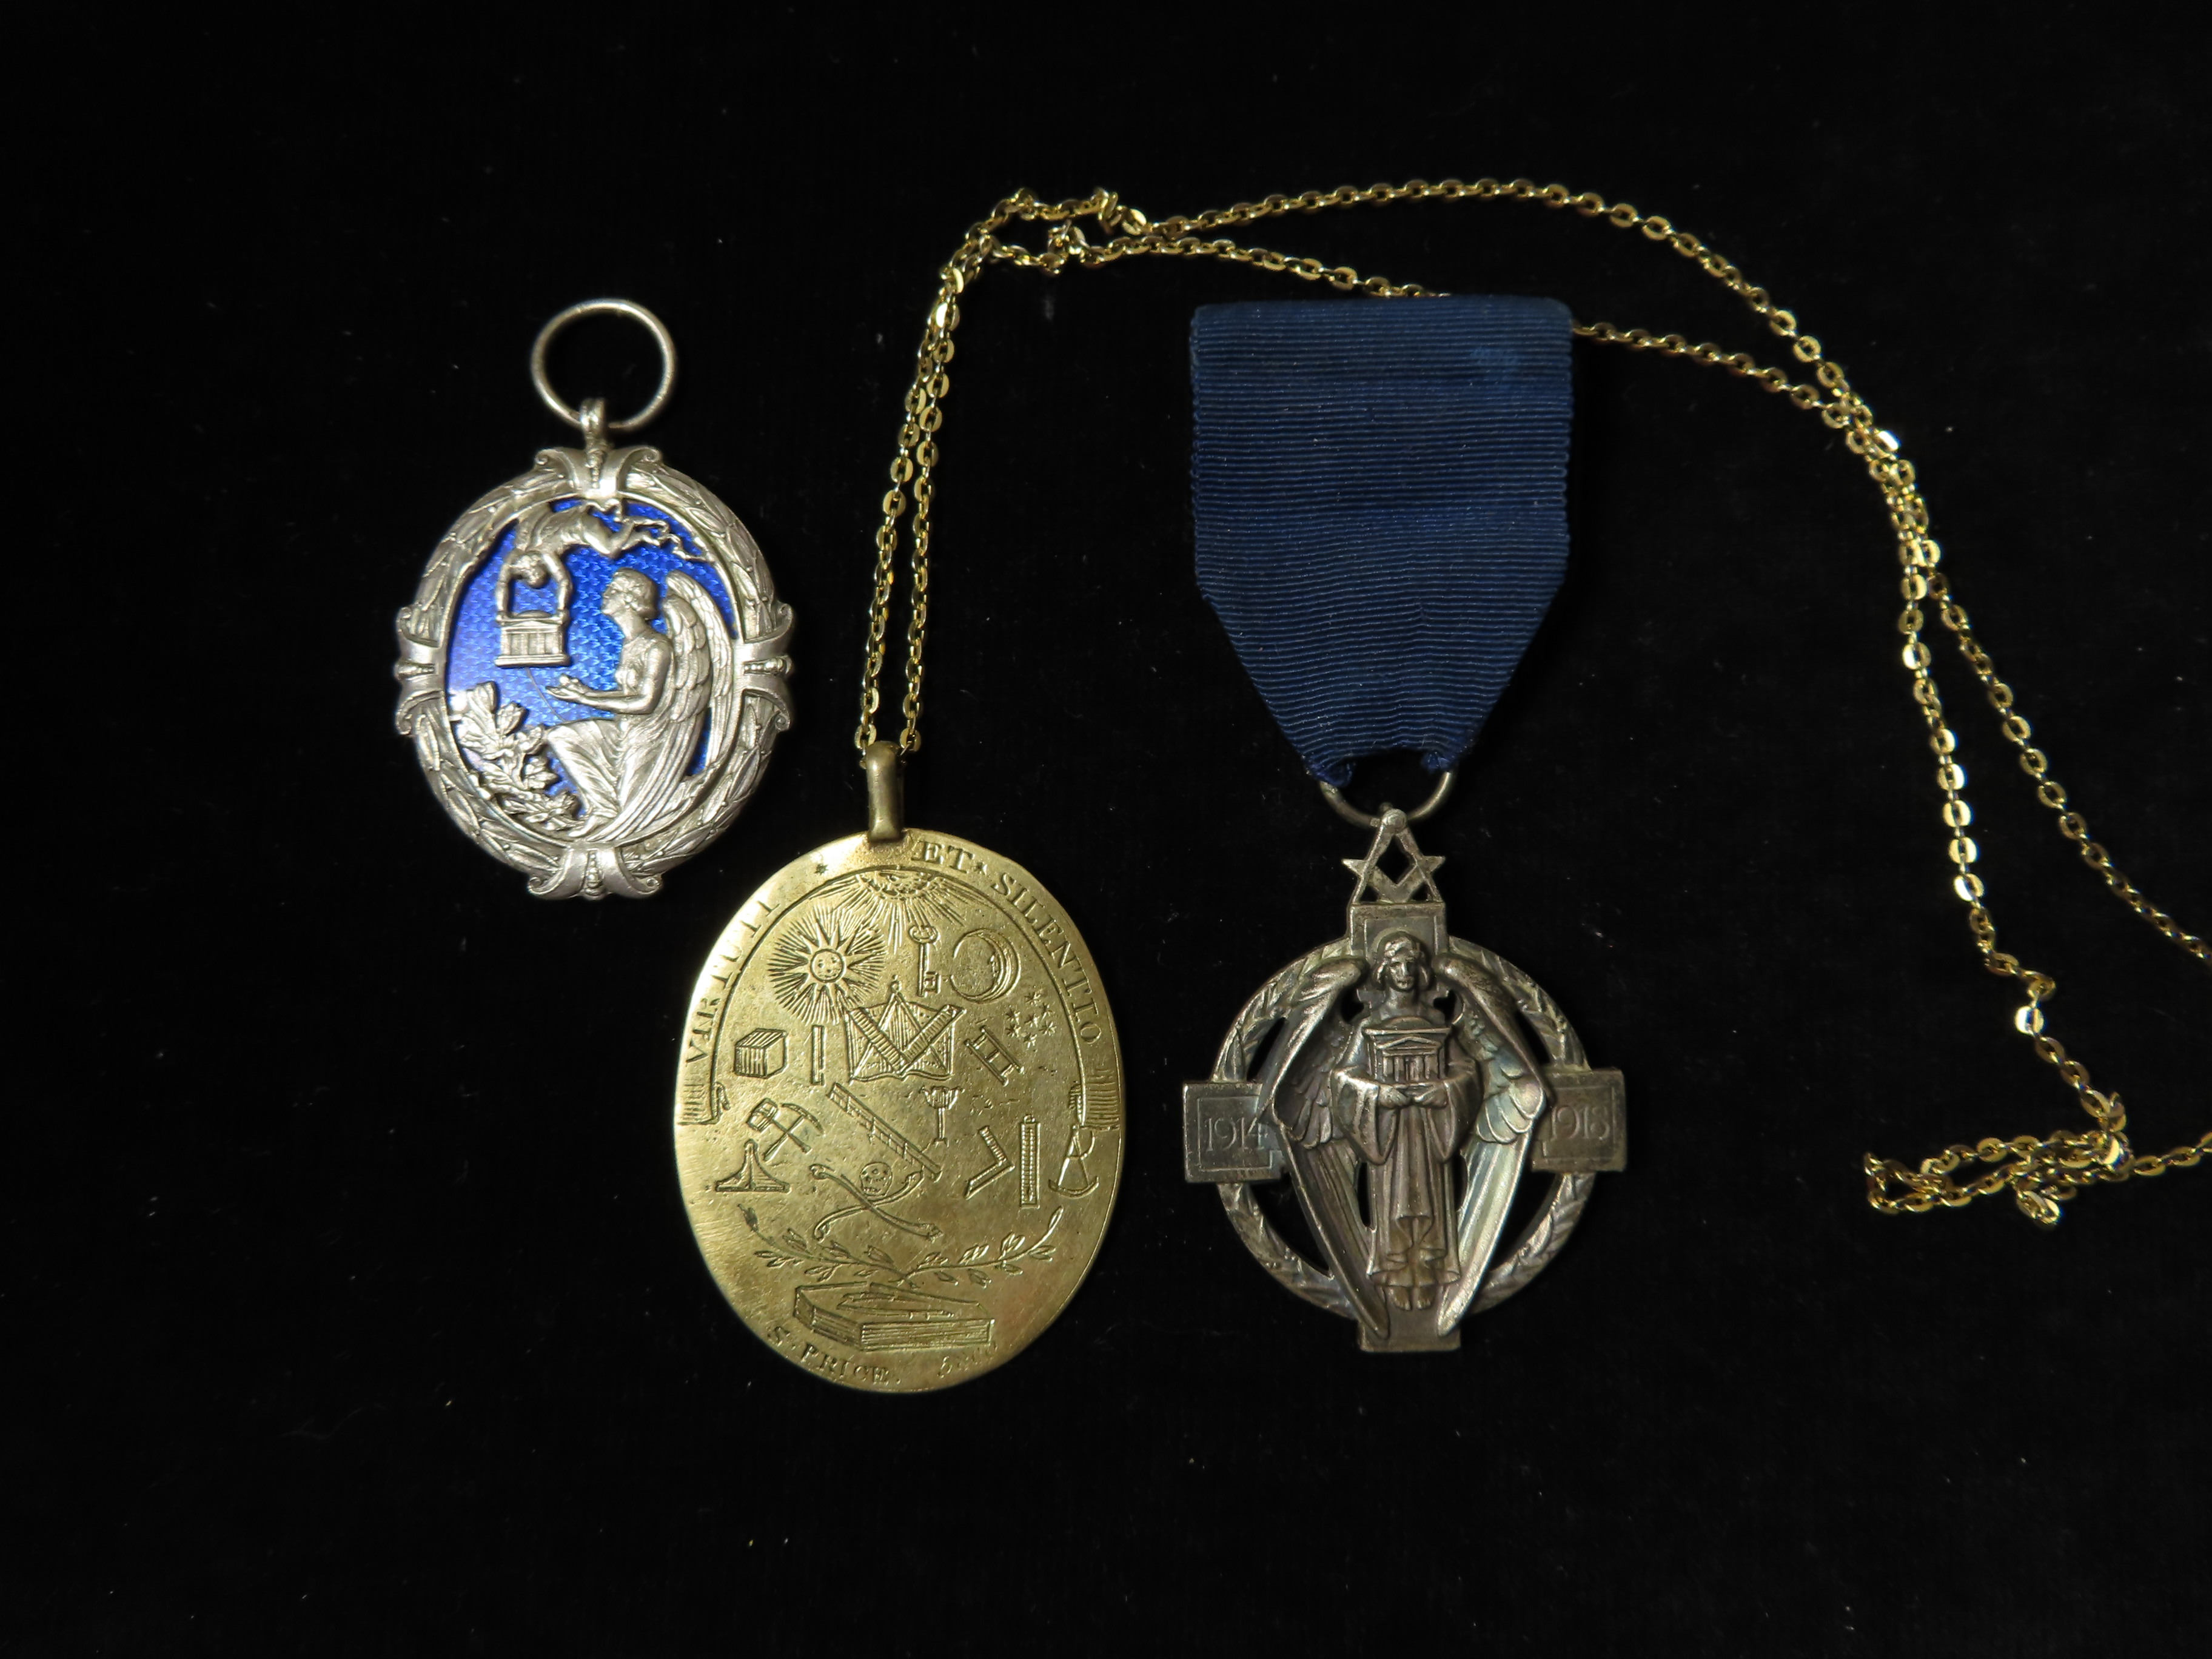 Medals, badges and misc. other items in two plastic tubs (collection recommended) - Image 2 of 8